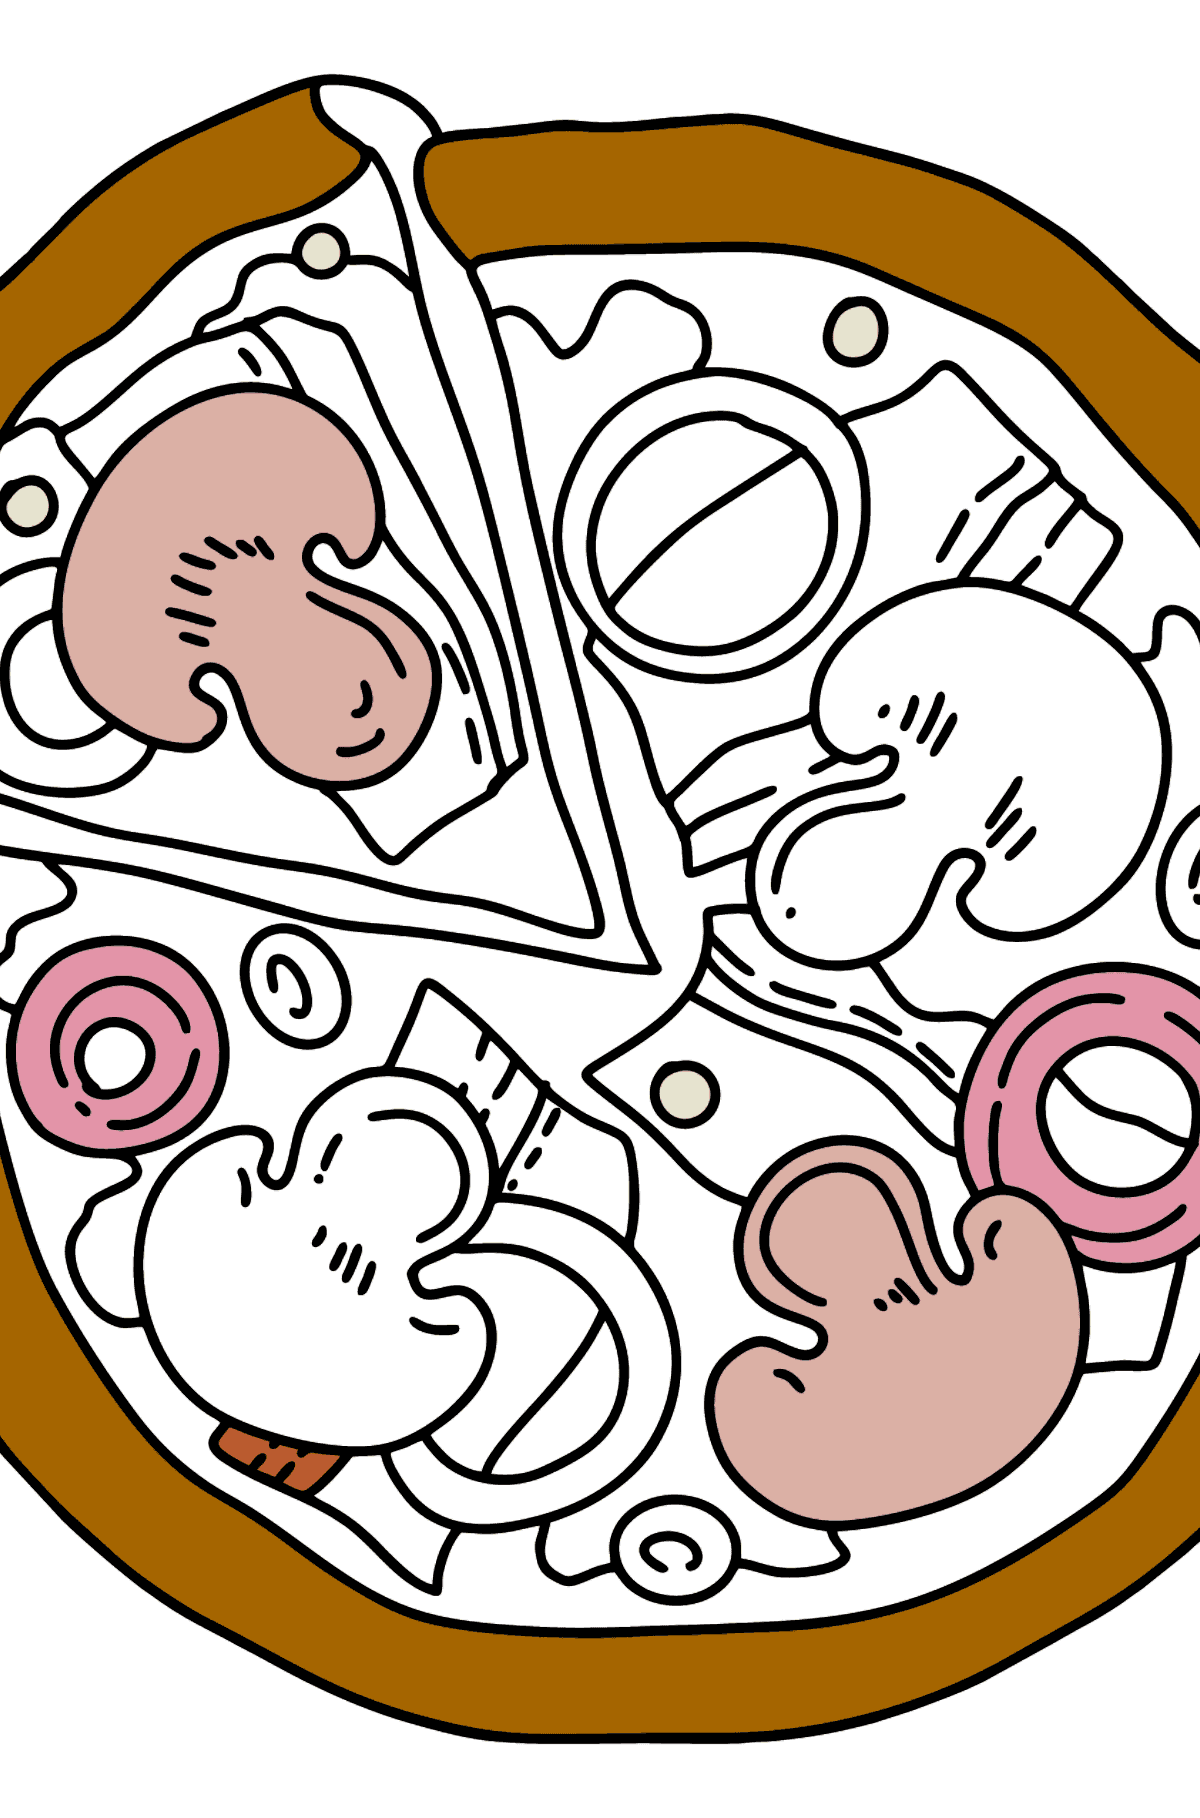 Pizza with Mushrooms coloring page - Coloring Pages for Kids